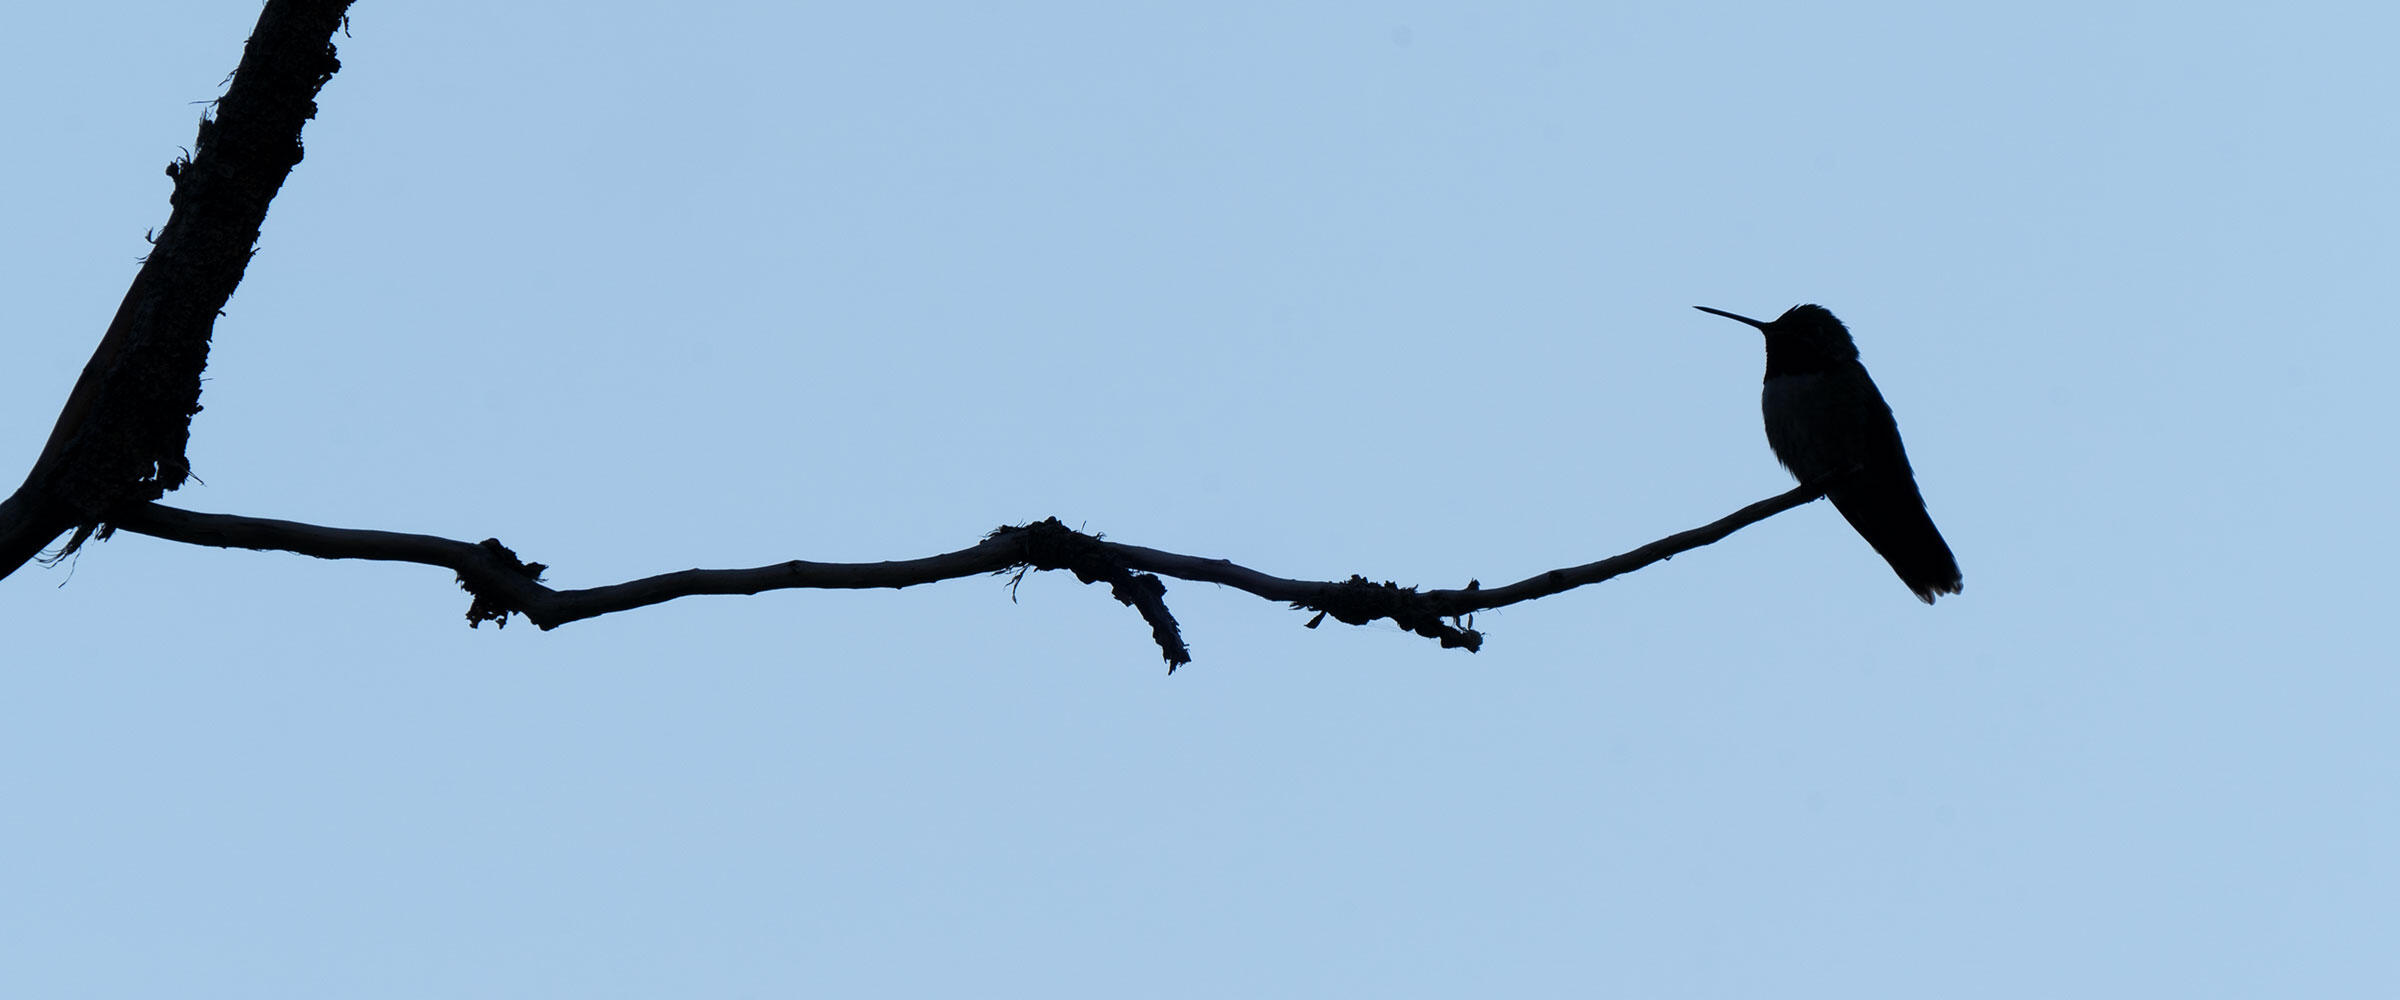 A hummingbird perched on a branch, silhouetted at dusk.